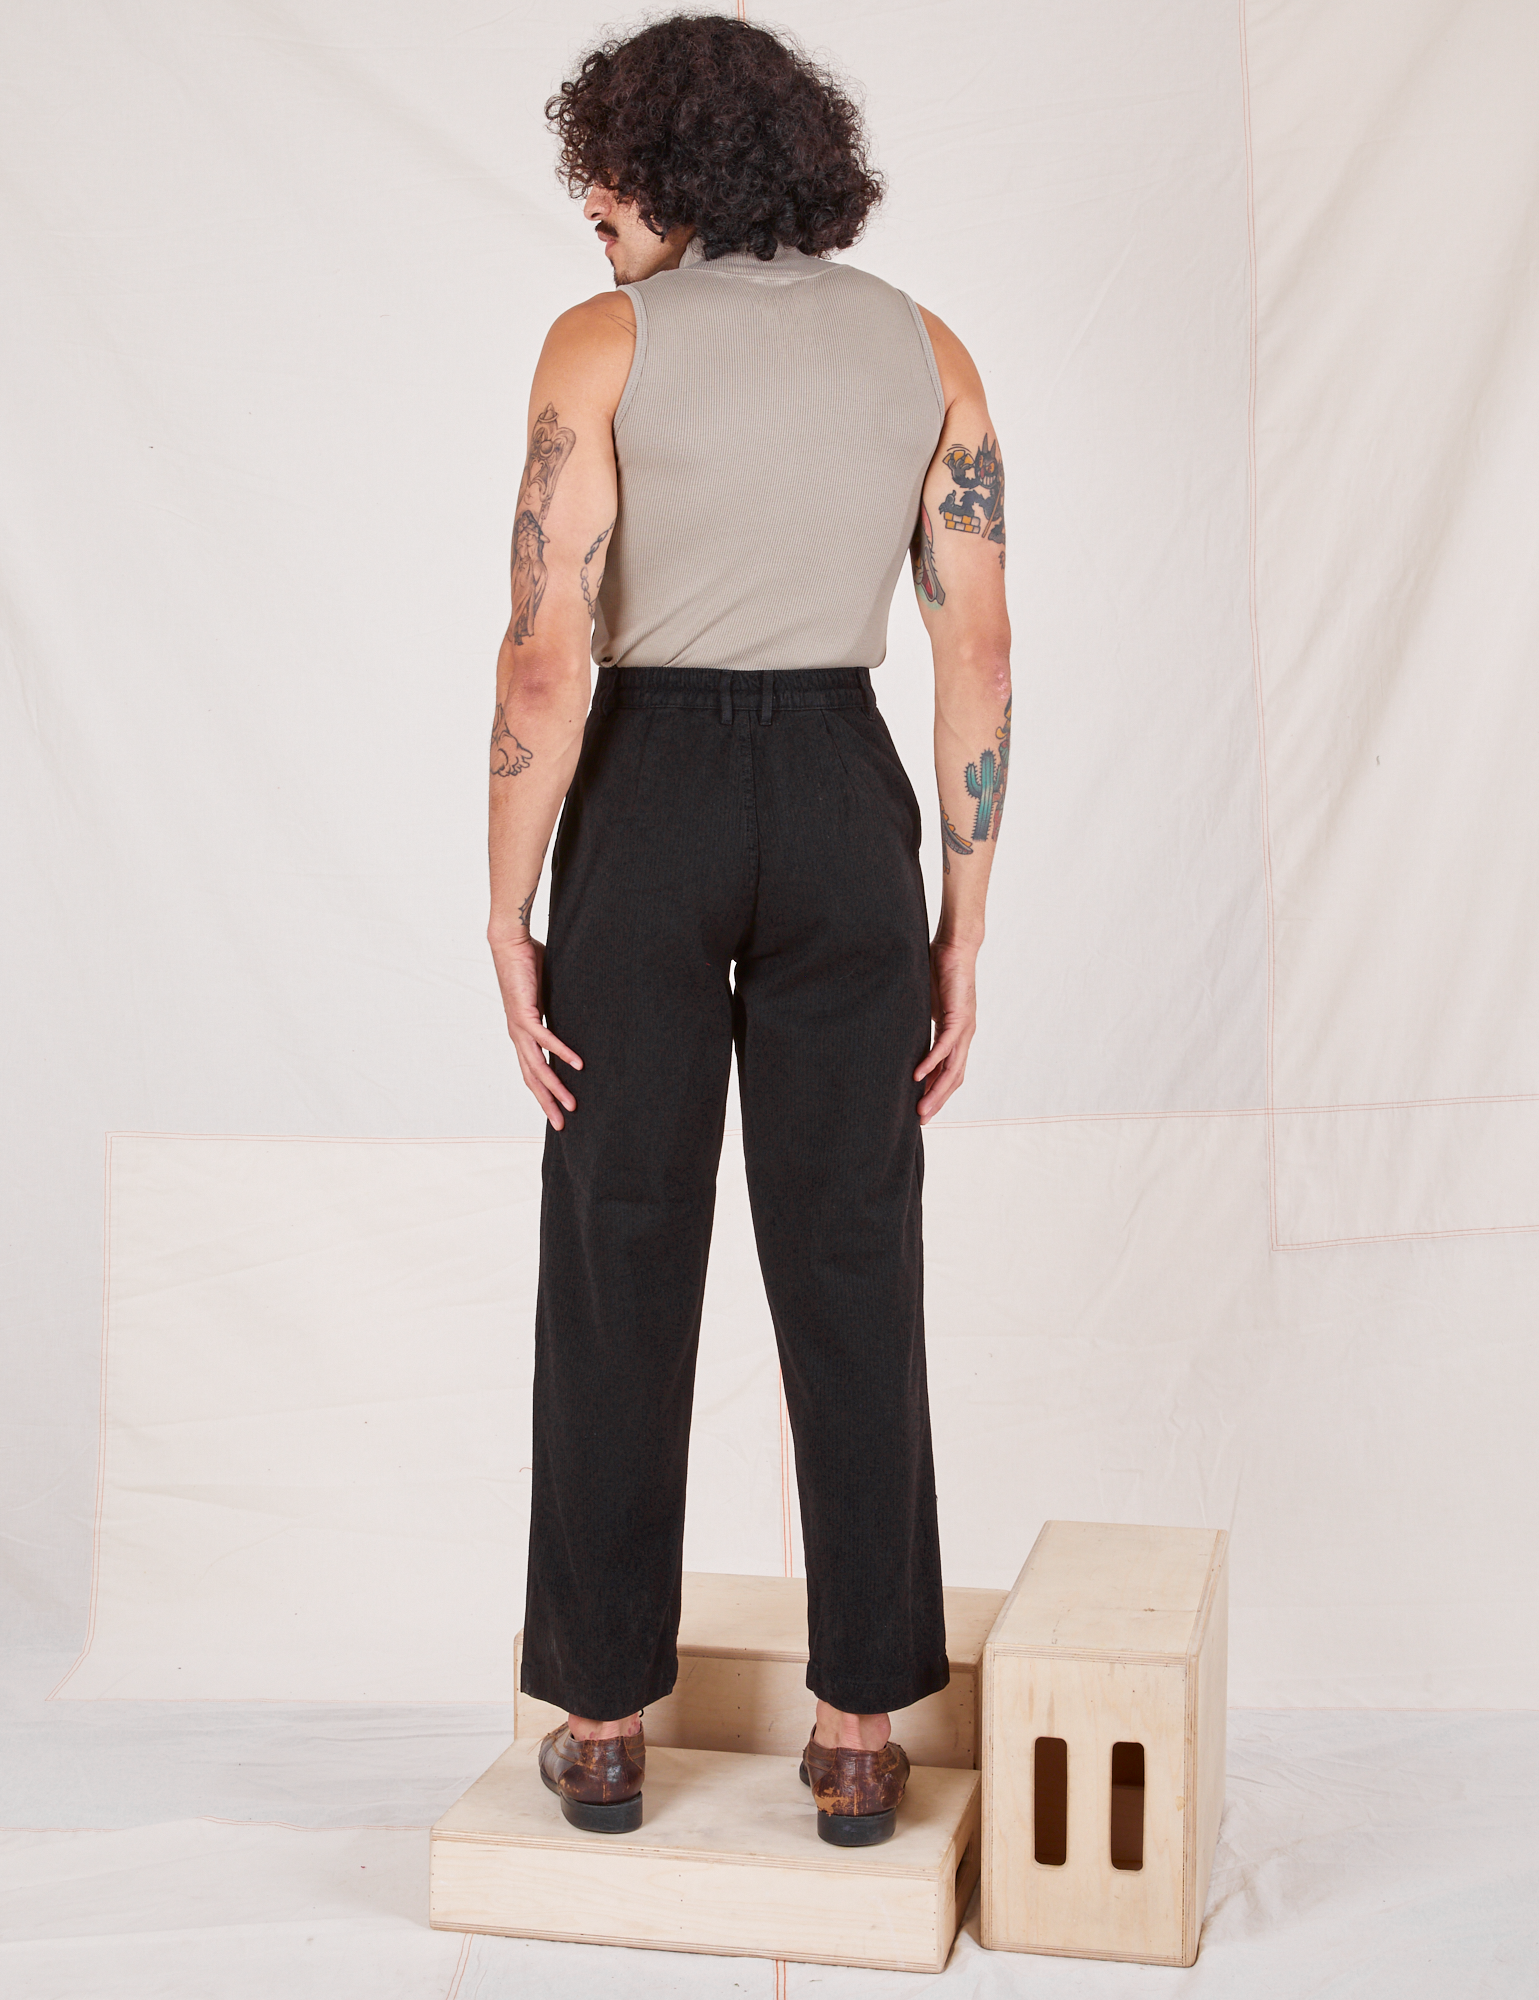 Back view of Heritage Trousers in Basic Black and khaki grey Sleeveless Turtleneck worn by Jesse